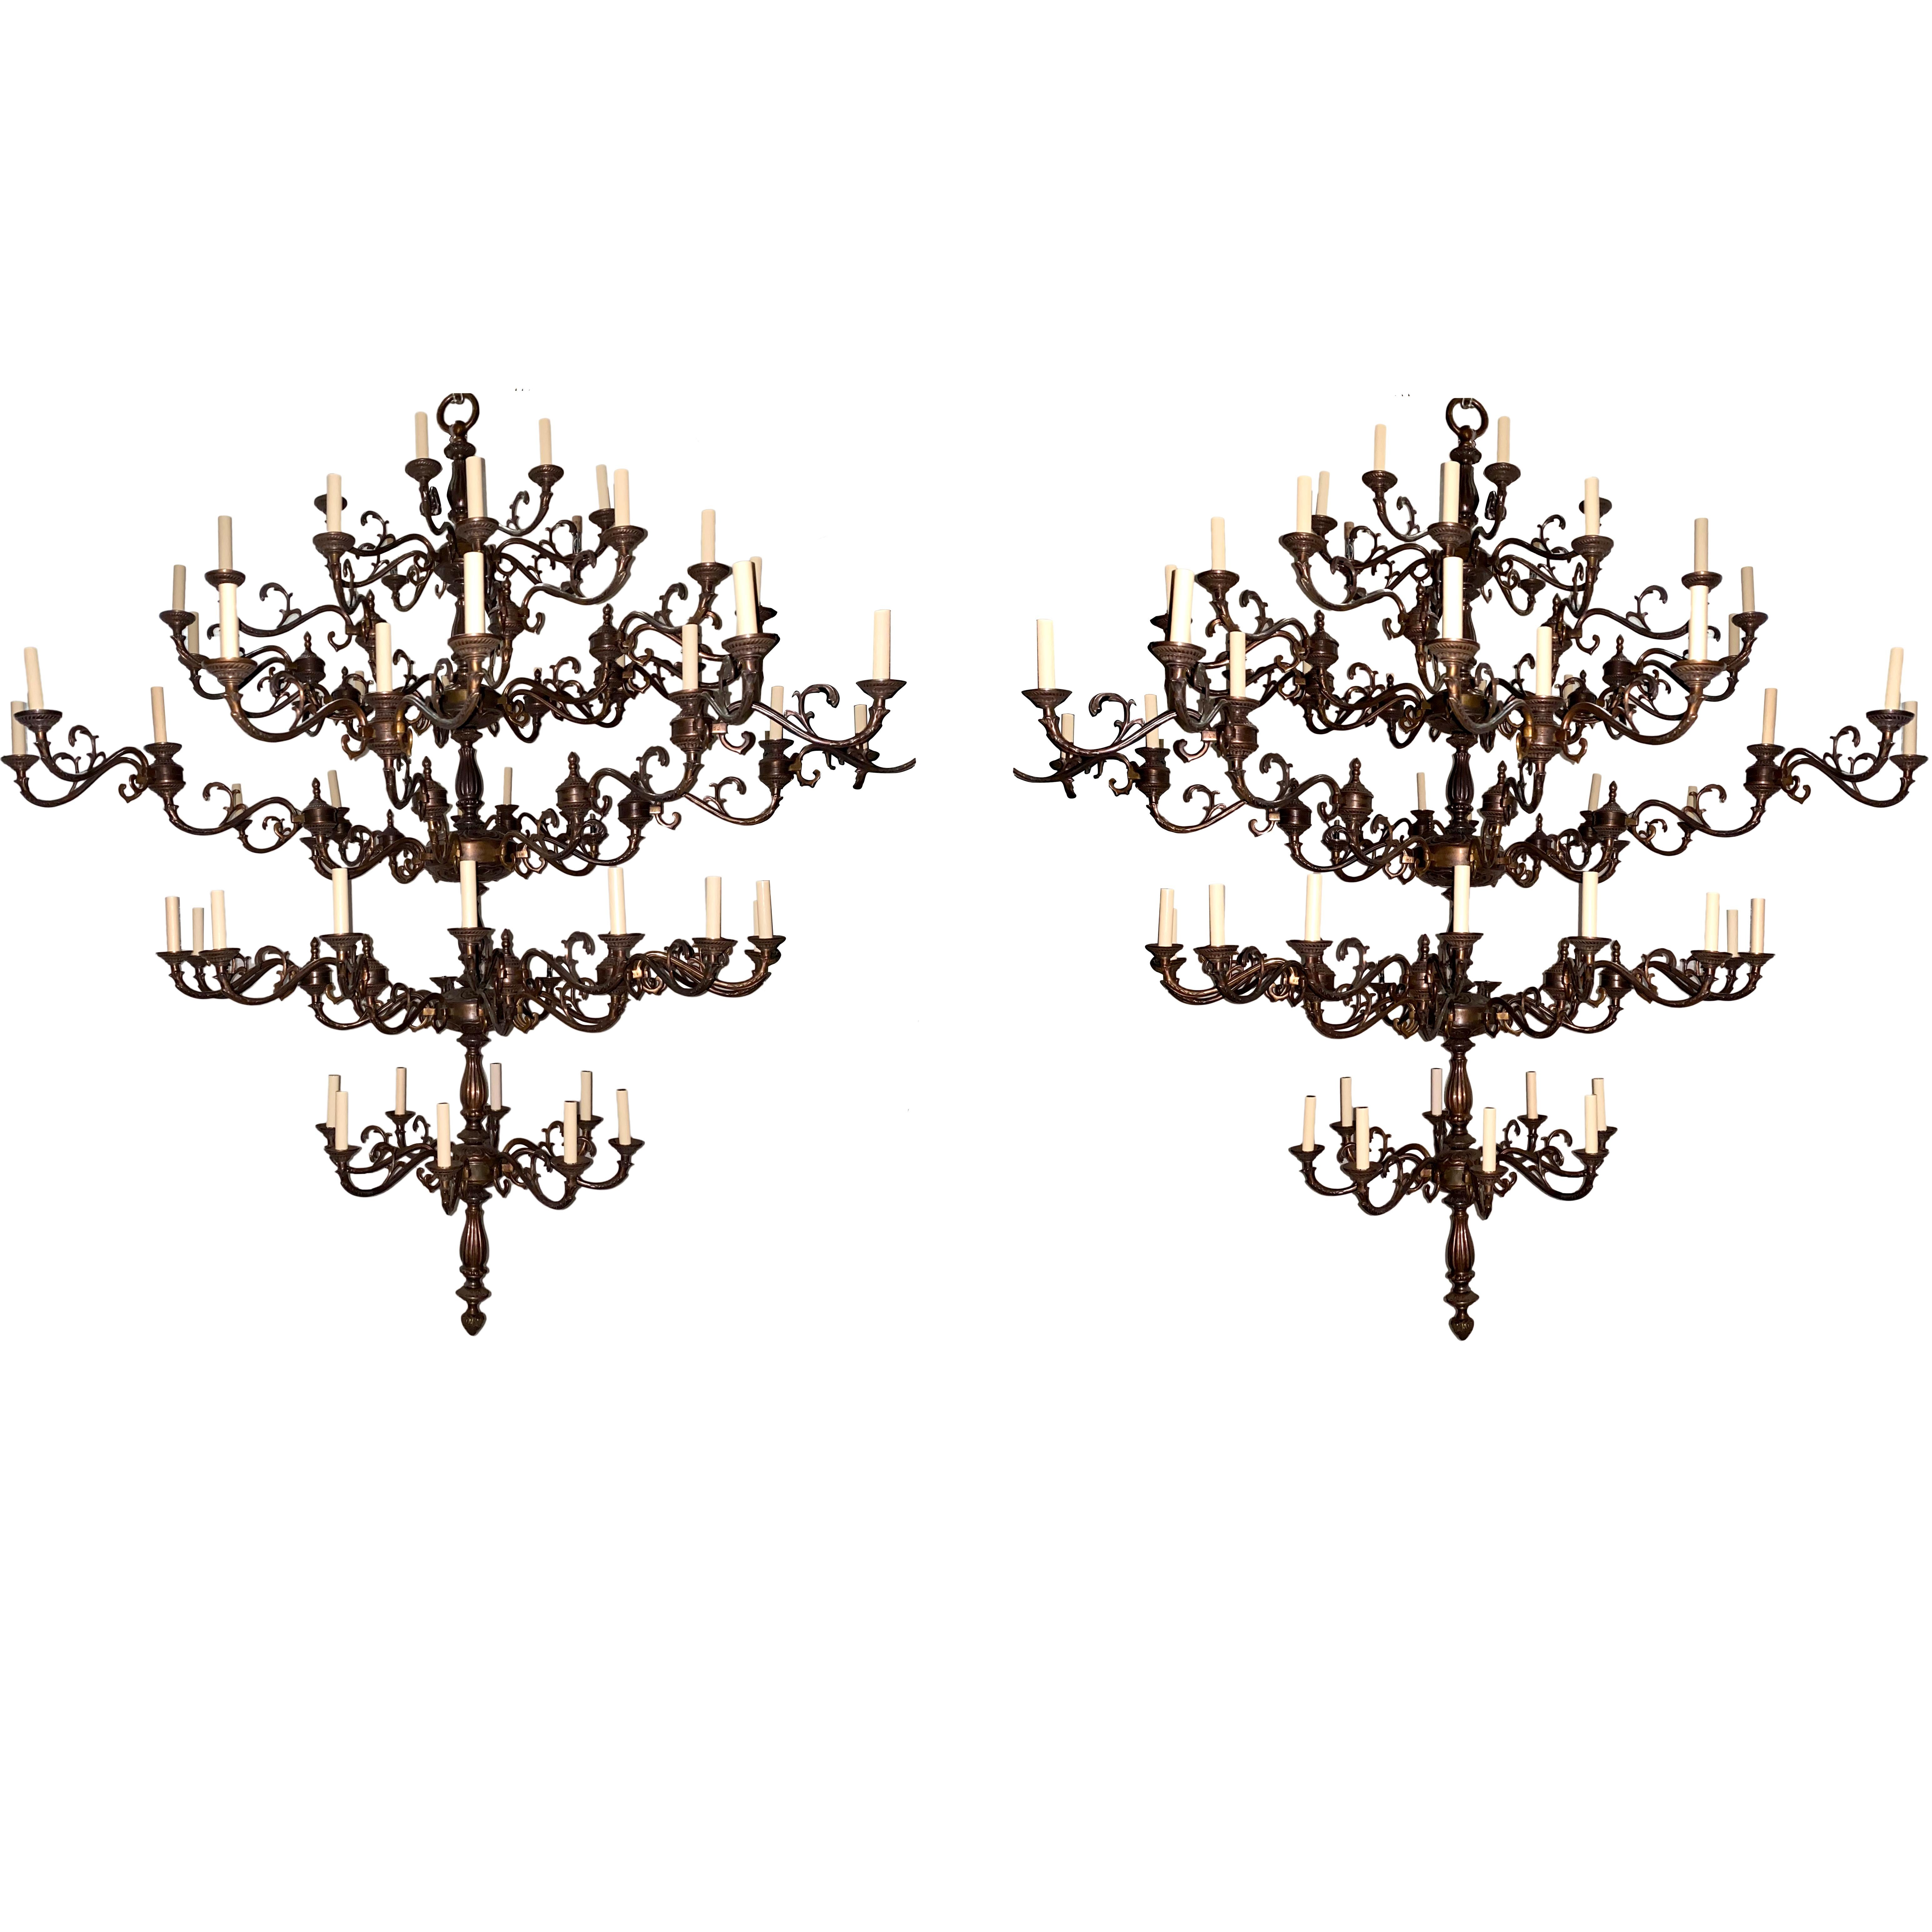 Pair of circa 1940s French bronze chandeliers with 72 lights each, 
six tiers, original patina. 
Rewired for use in US

Measurements:
Drop 78